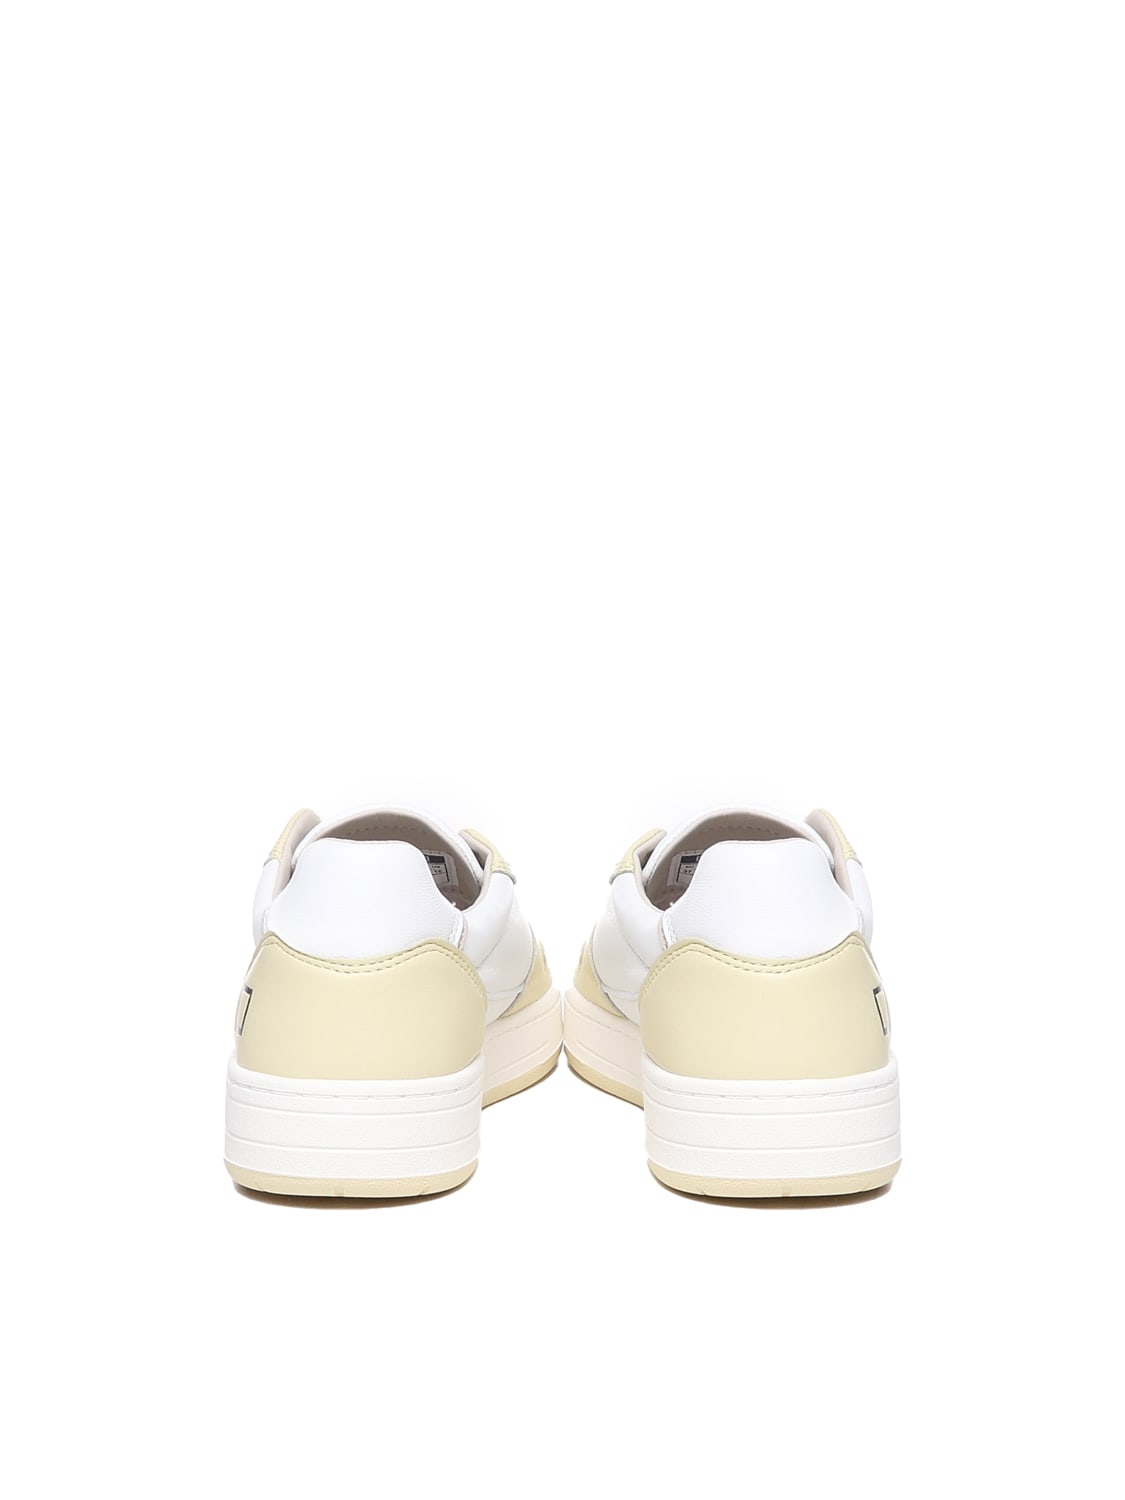 Shop Date Court 2.0 Soft Sneakers In White-yellow